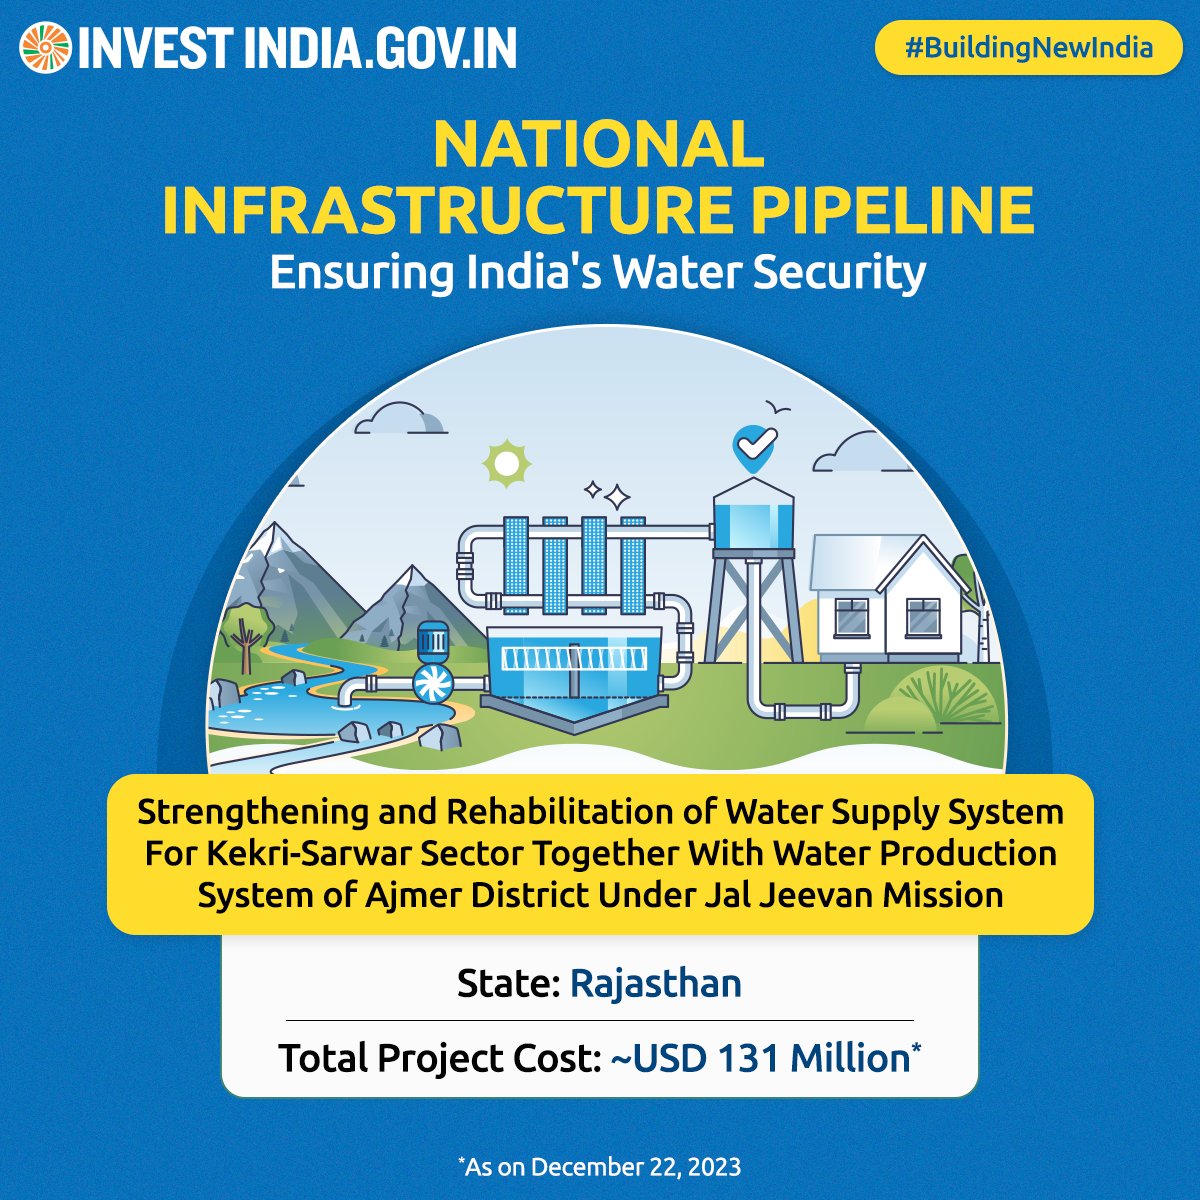 As part of #NIP, this project focuses on constructing water treatment facilities, ensuring a secure & reliable water supply for drinking purposes in #Rajasthan.

Know more: bit.ly/page_NIP

#BuildingNewIndia #NationalInfrastructurePipeline #InvestInRajasthan #MakeInIndia